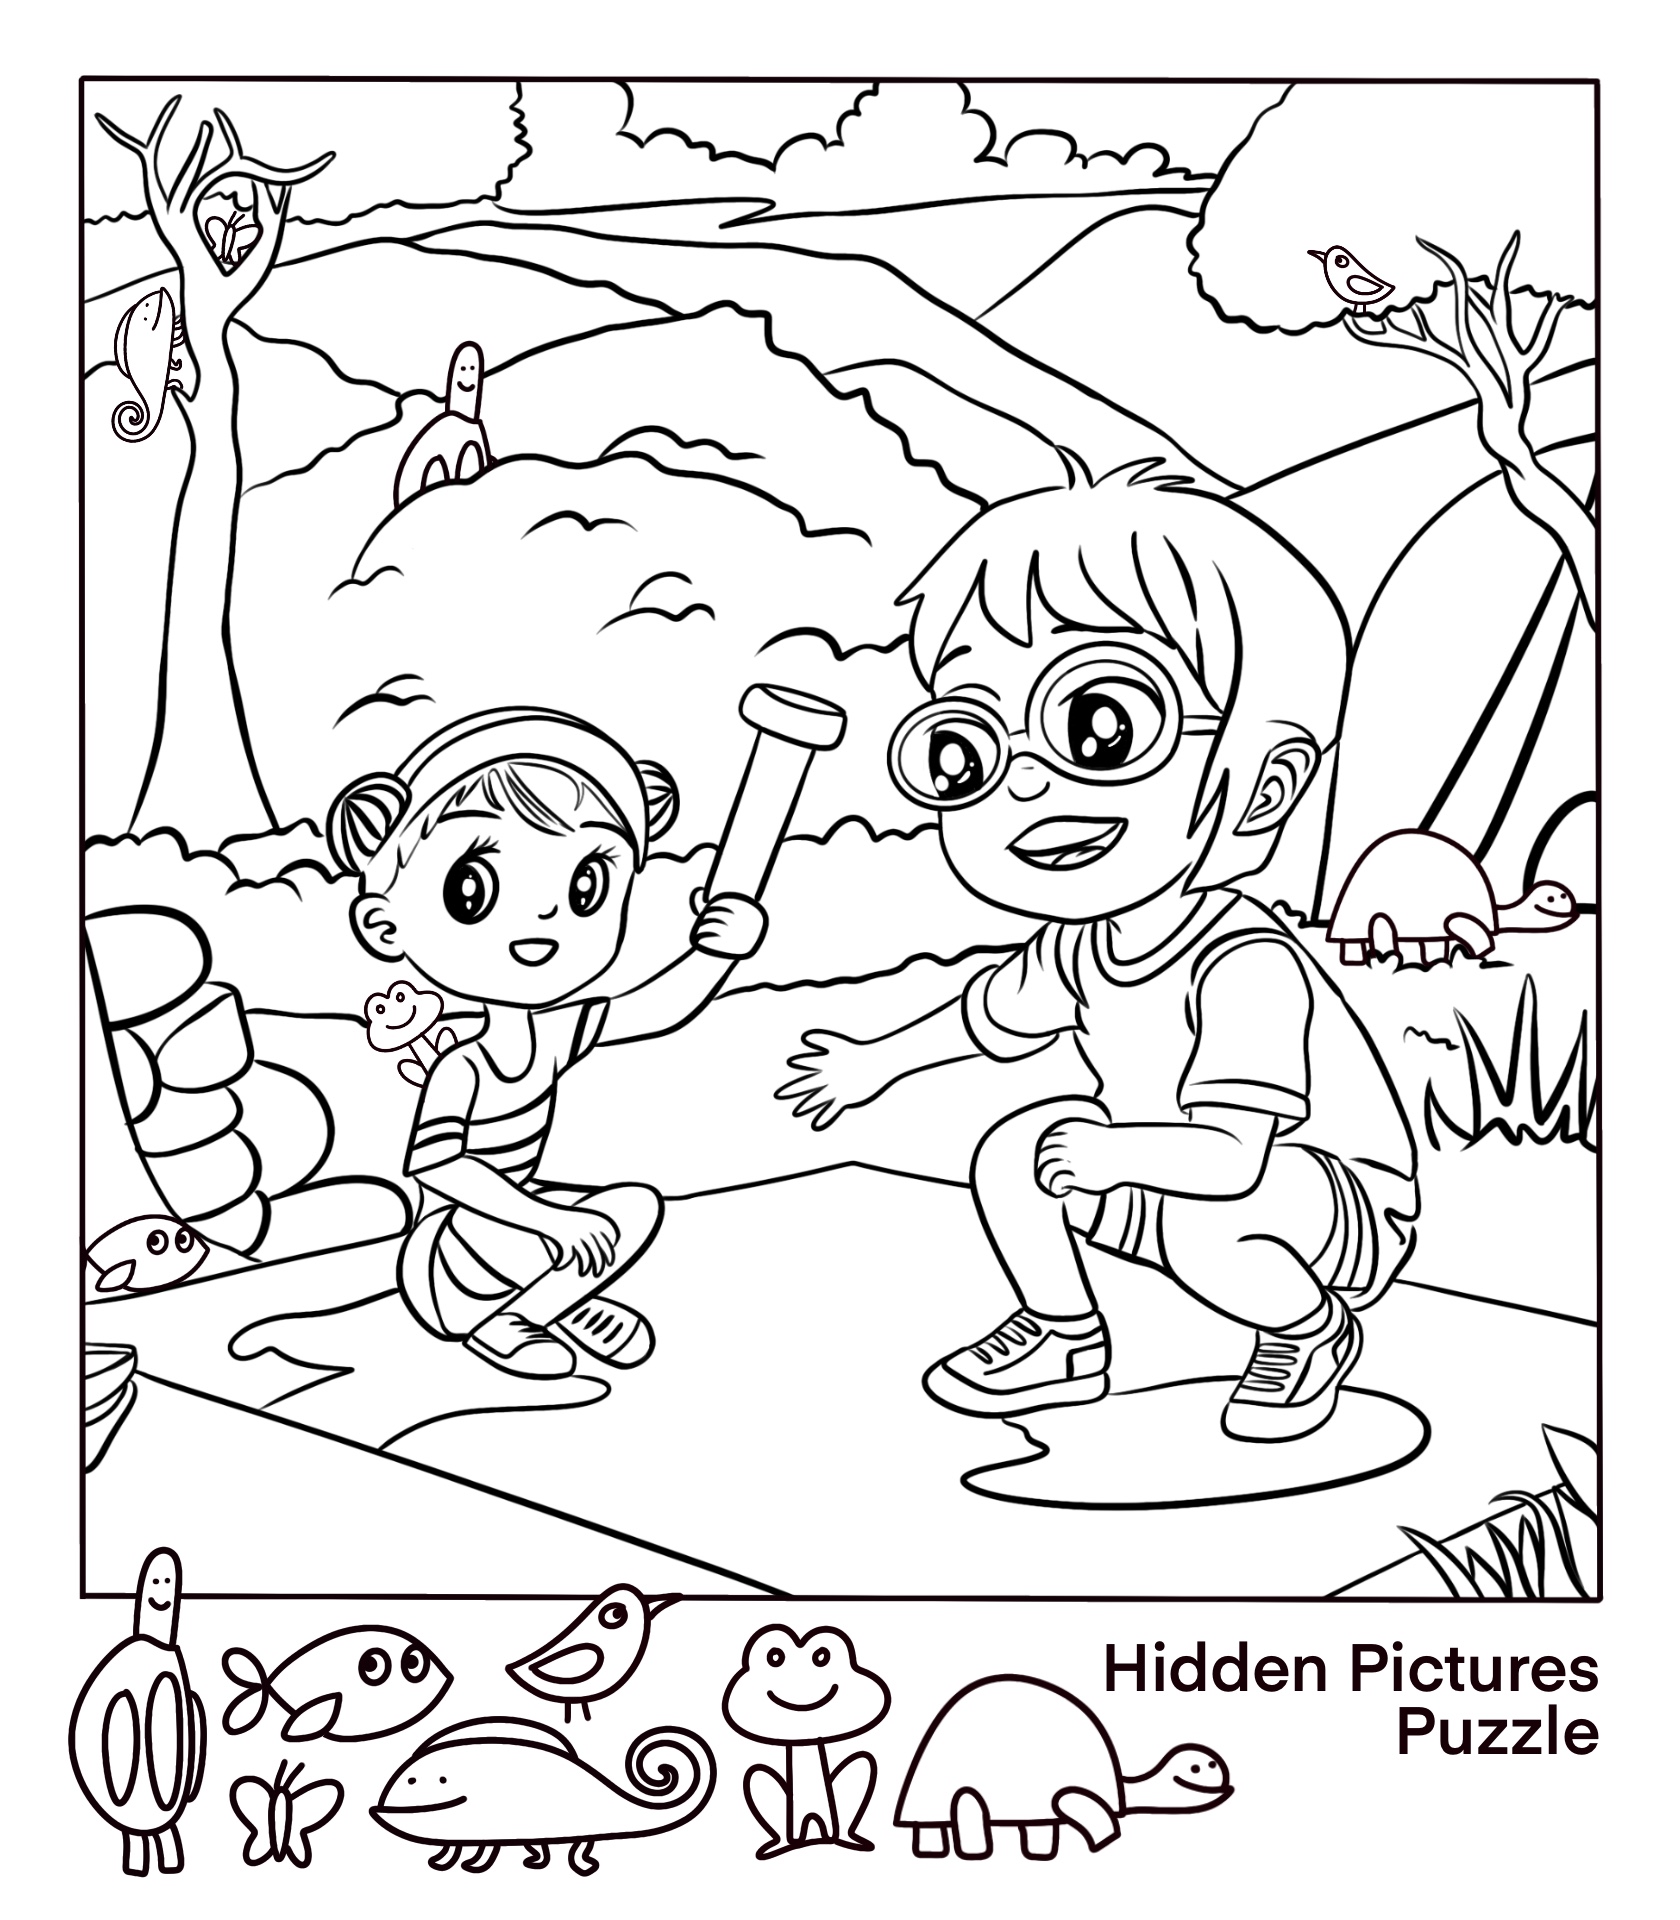 printable-hidden-pictures-worksheets-printable-world-holiday